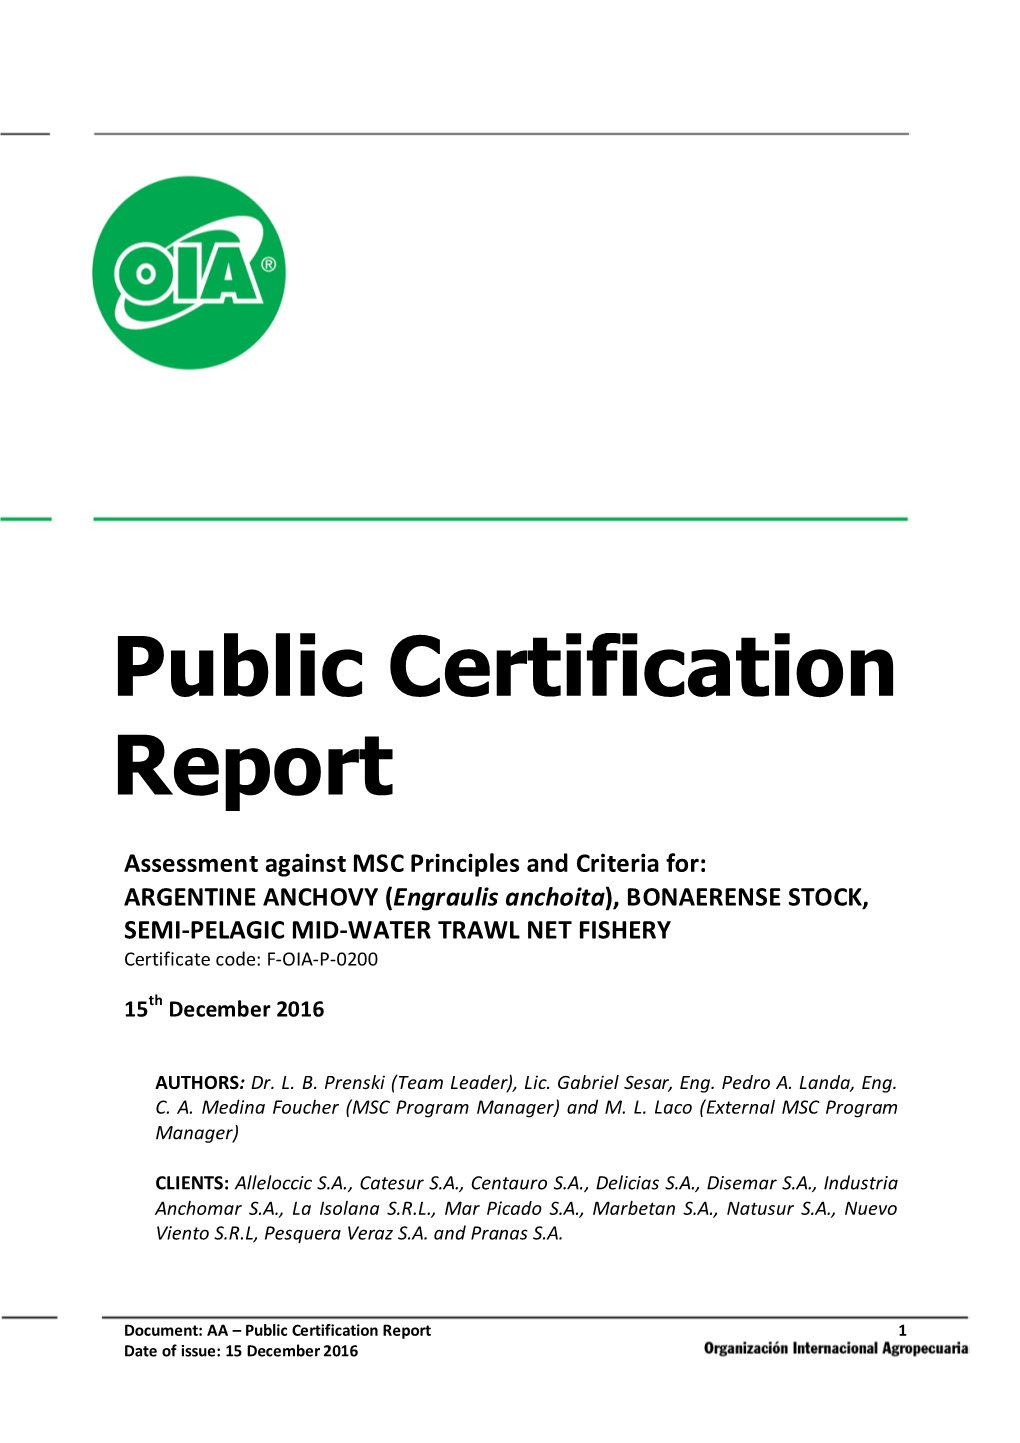 ARGENTINE ANCHOVY Public Certification Report 151216